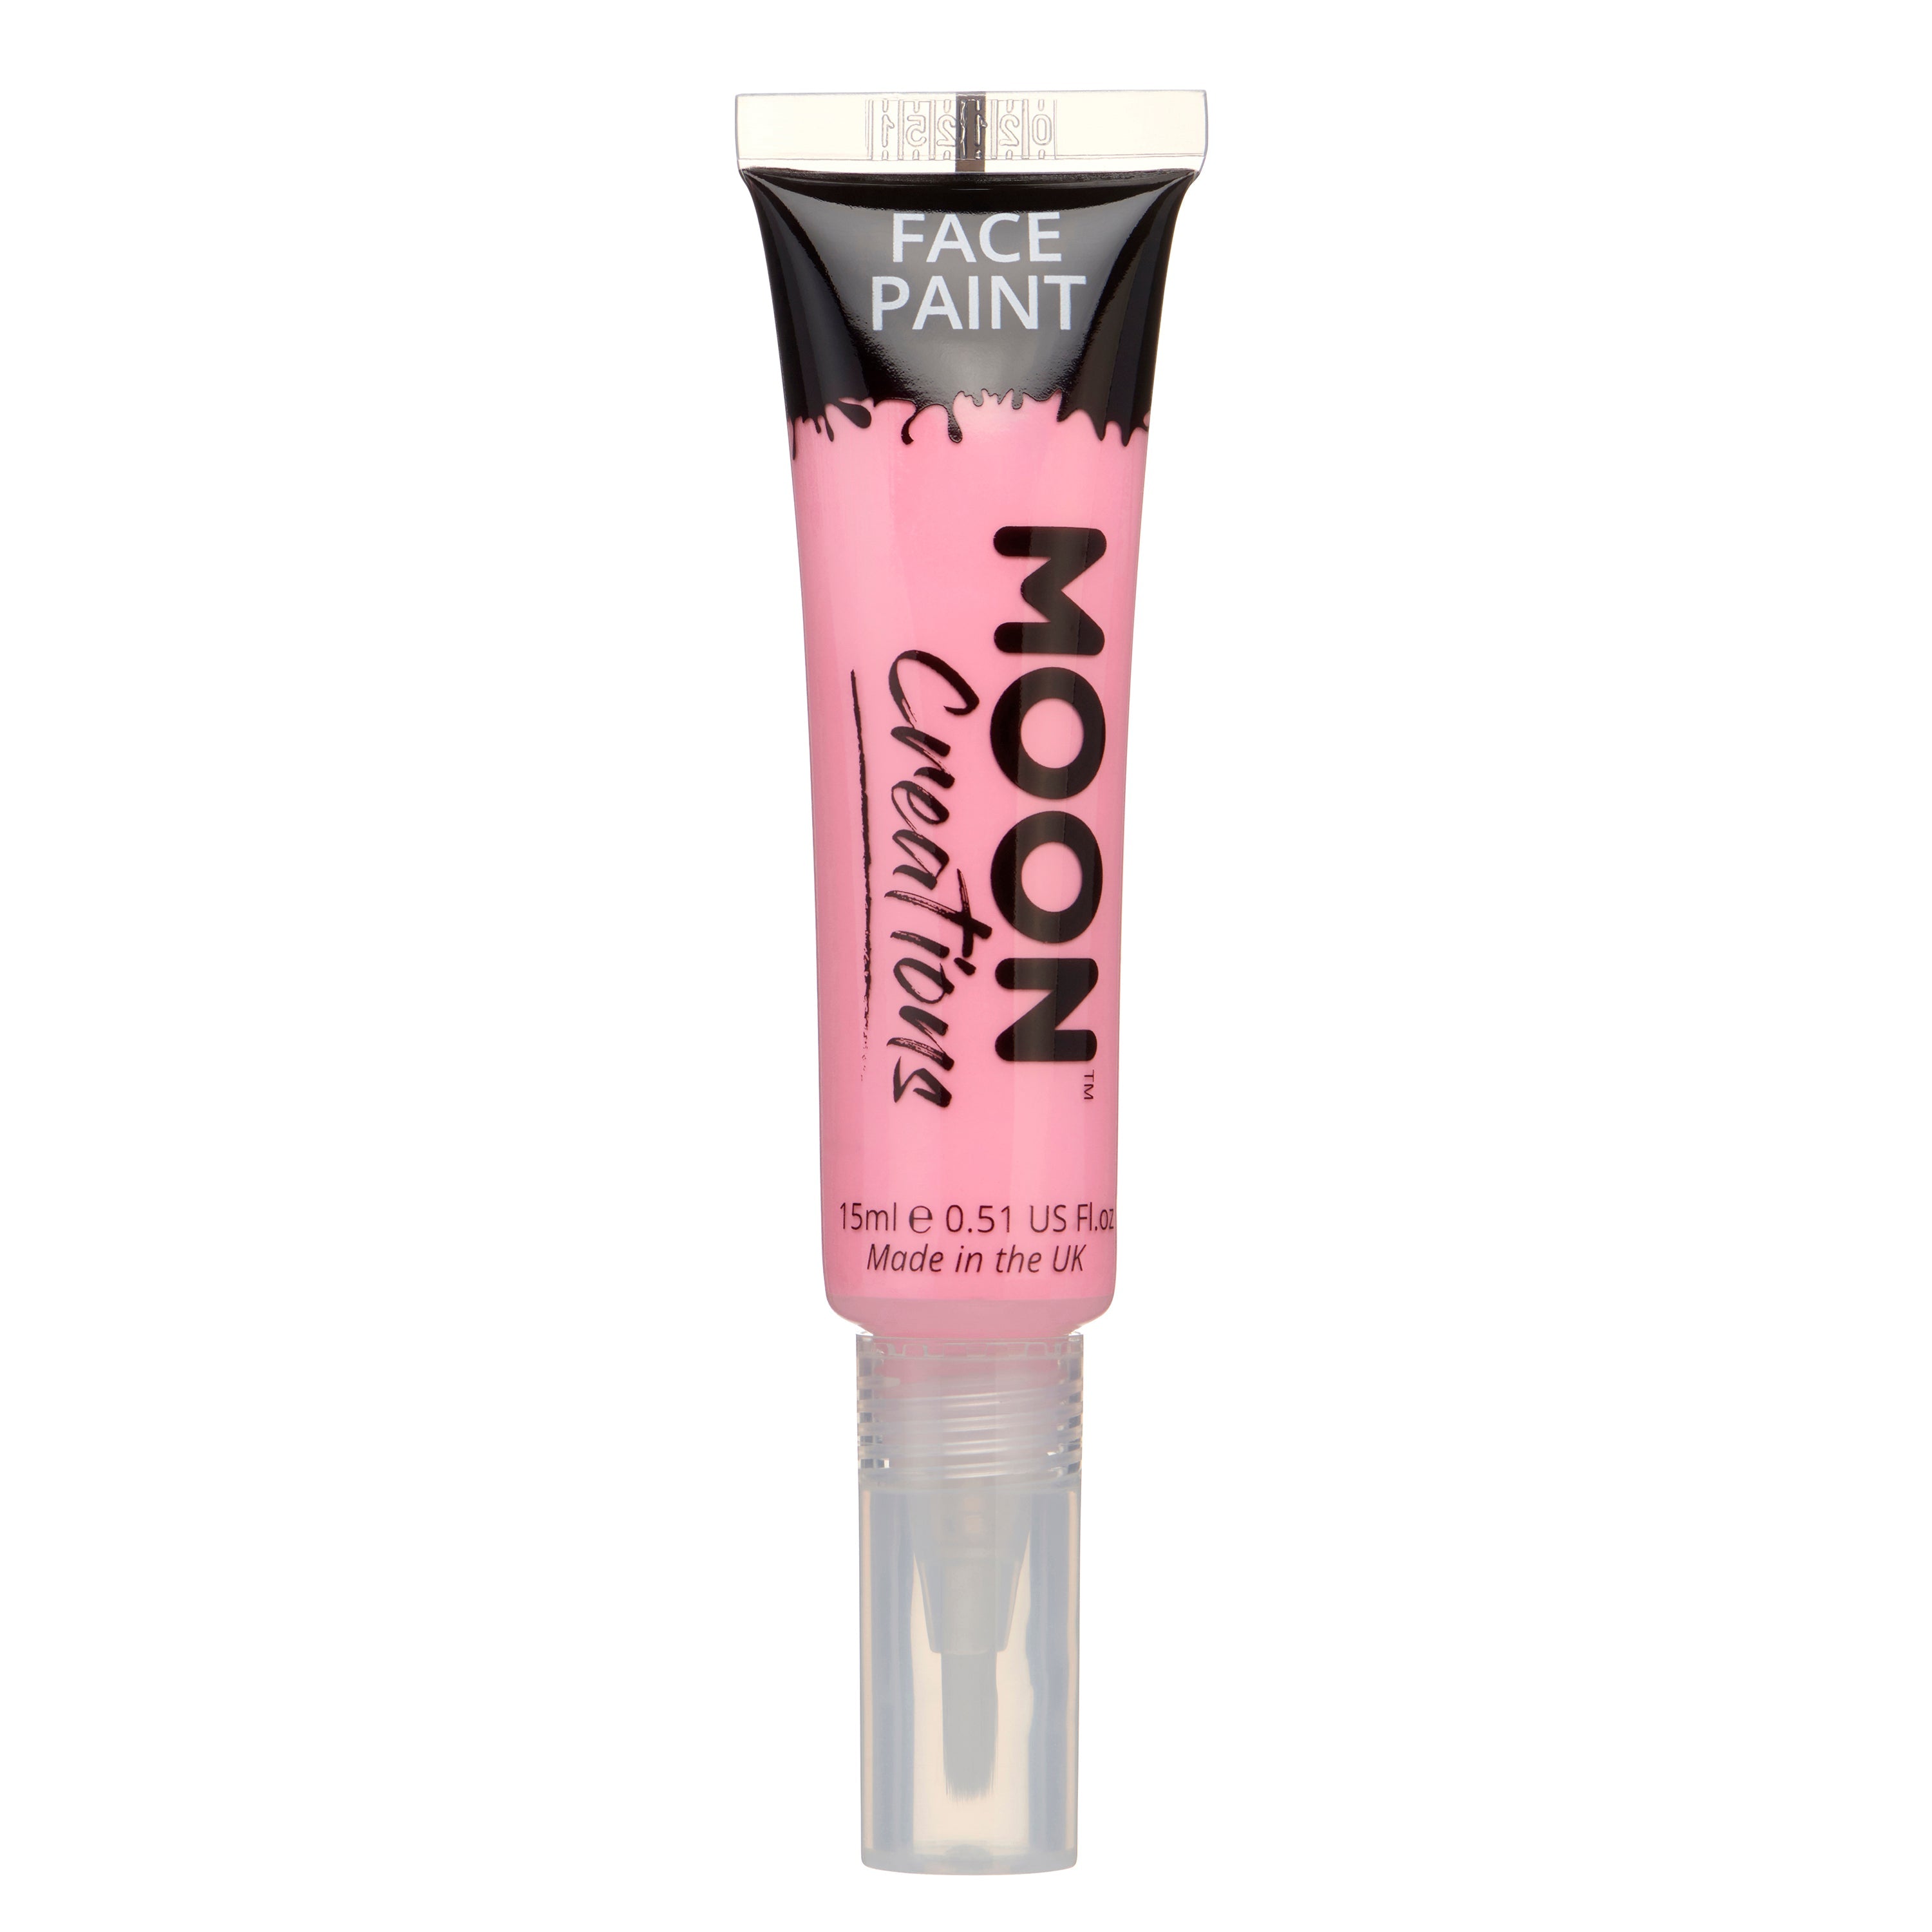 Pink - Face & Body Paint Makeup w/brush, 15mL. Cosmetically certified, FDA & Health Canada compliant, cruelty free and vegan.